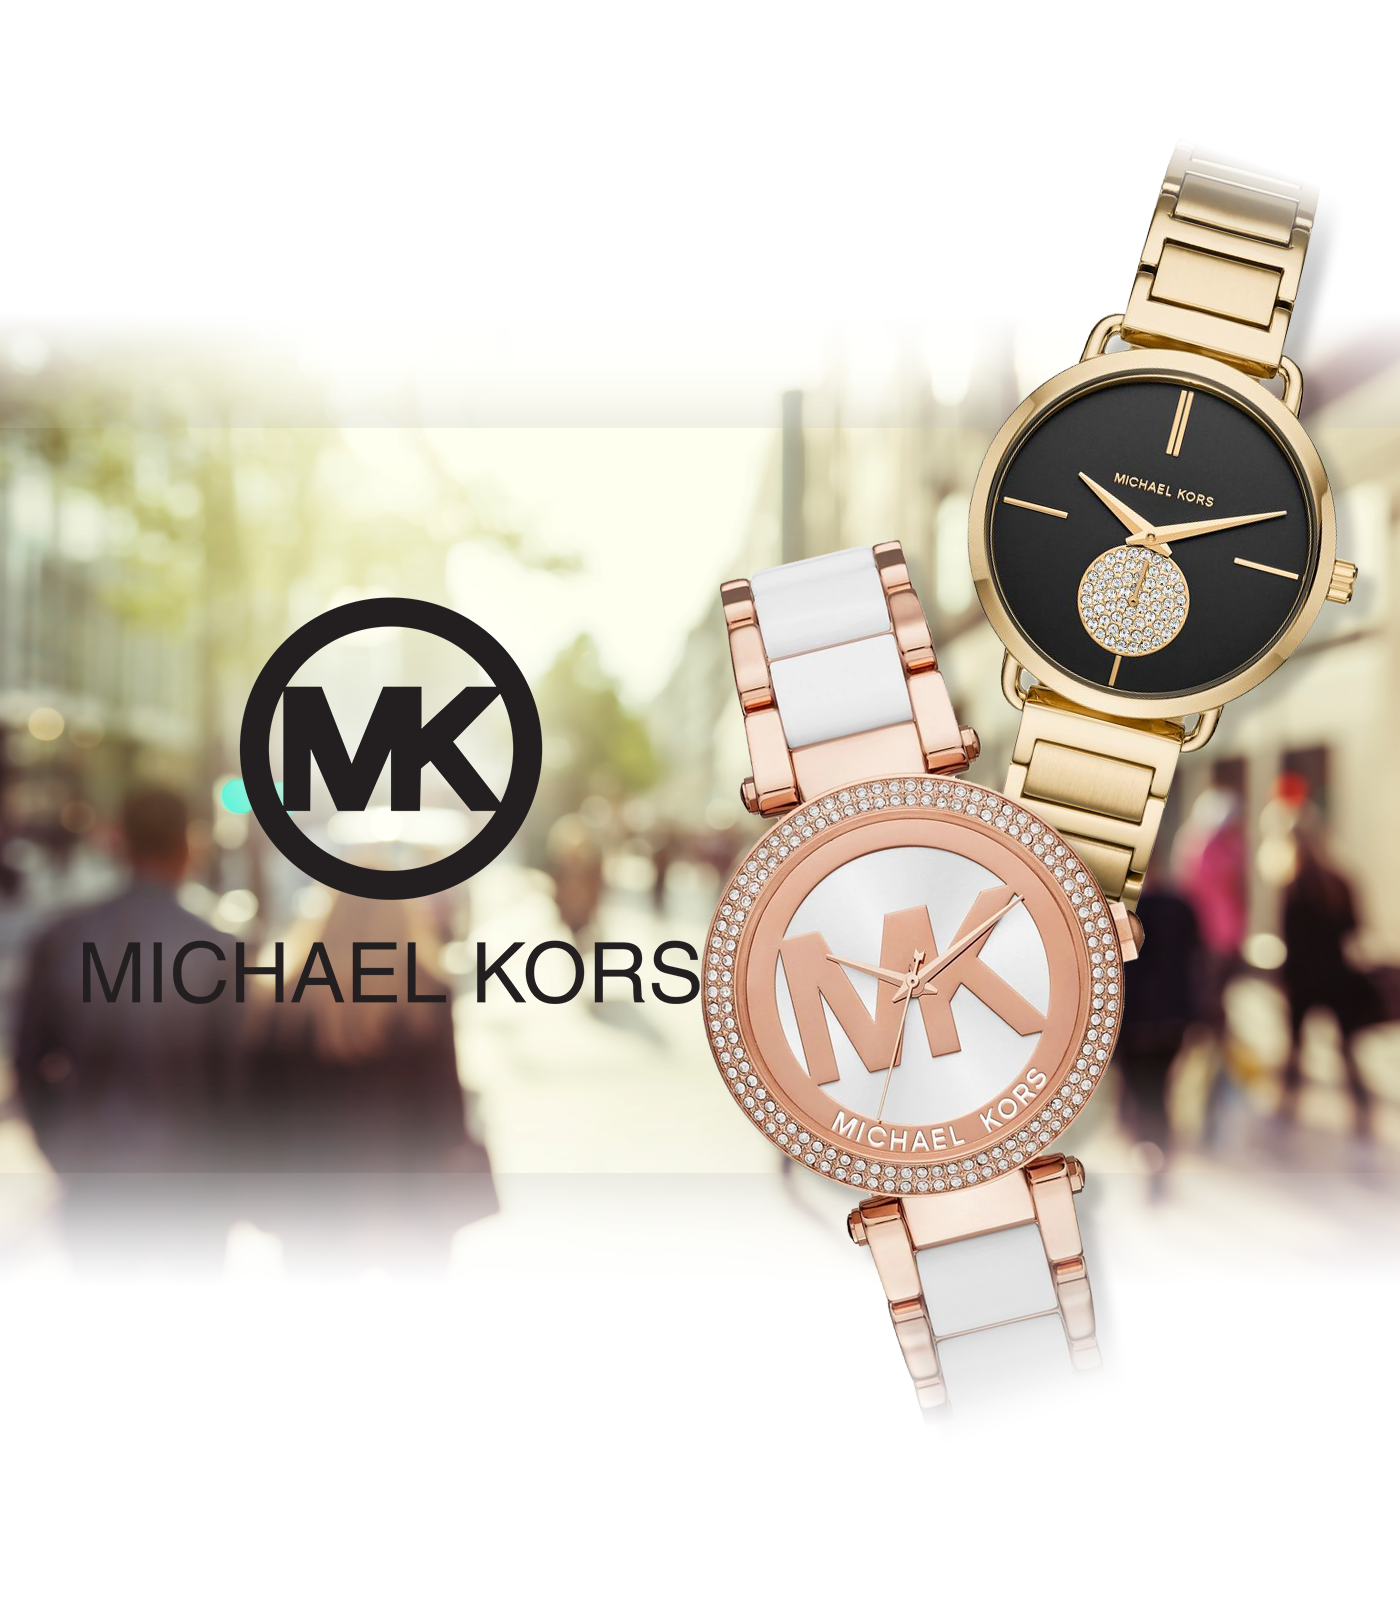 Michael Kors Watches  House of Fraser